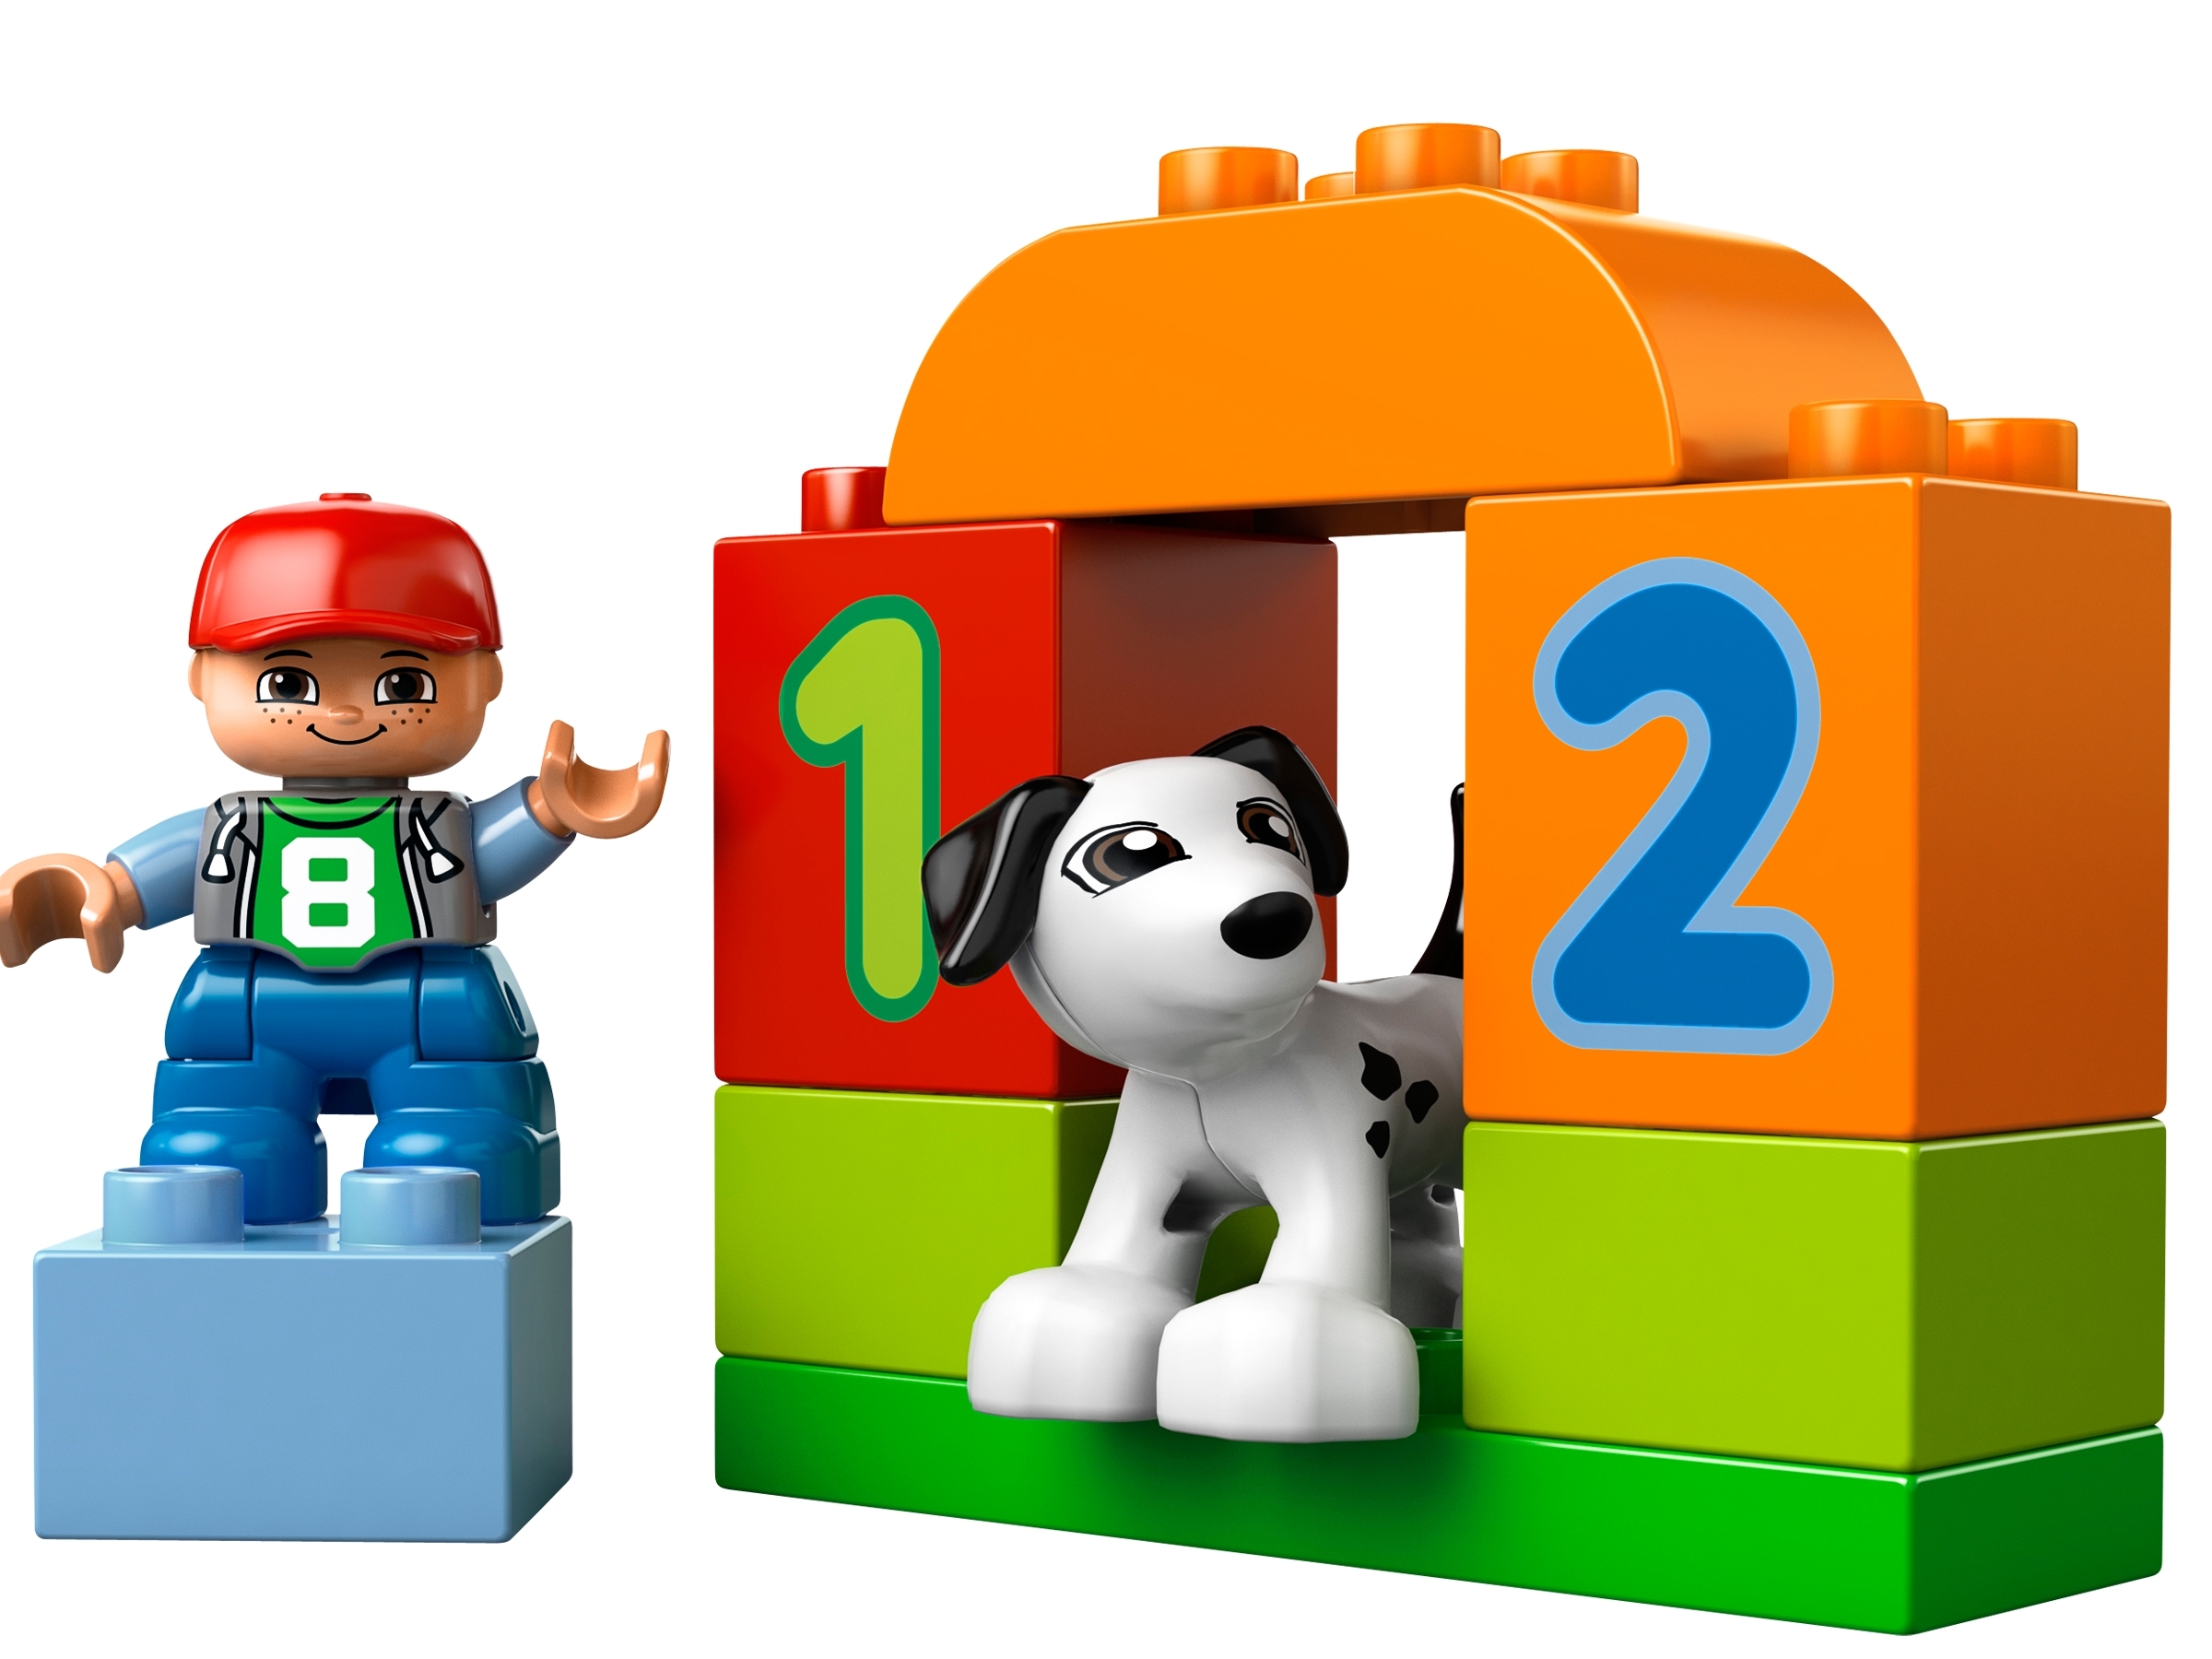 amme Awakening sidde Number Train 10558 | DUPLO® | Buy online at the Official LEGO® Shop US